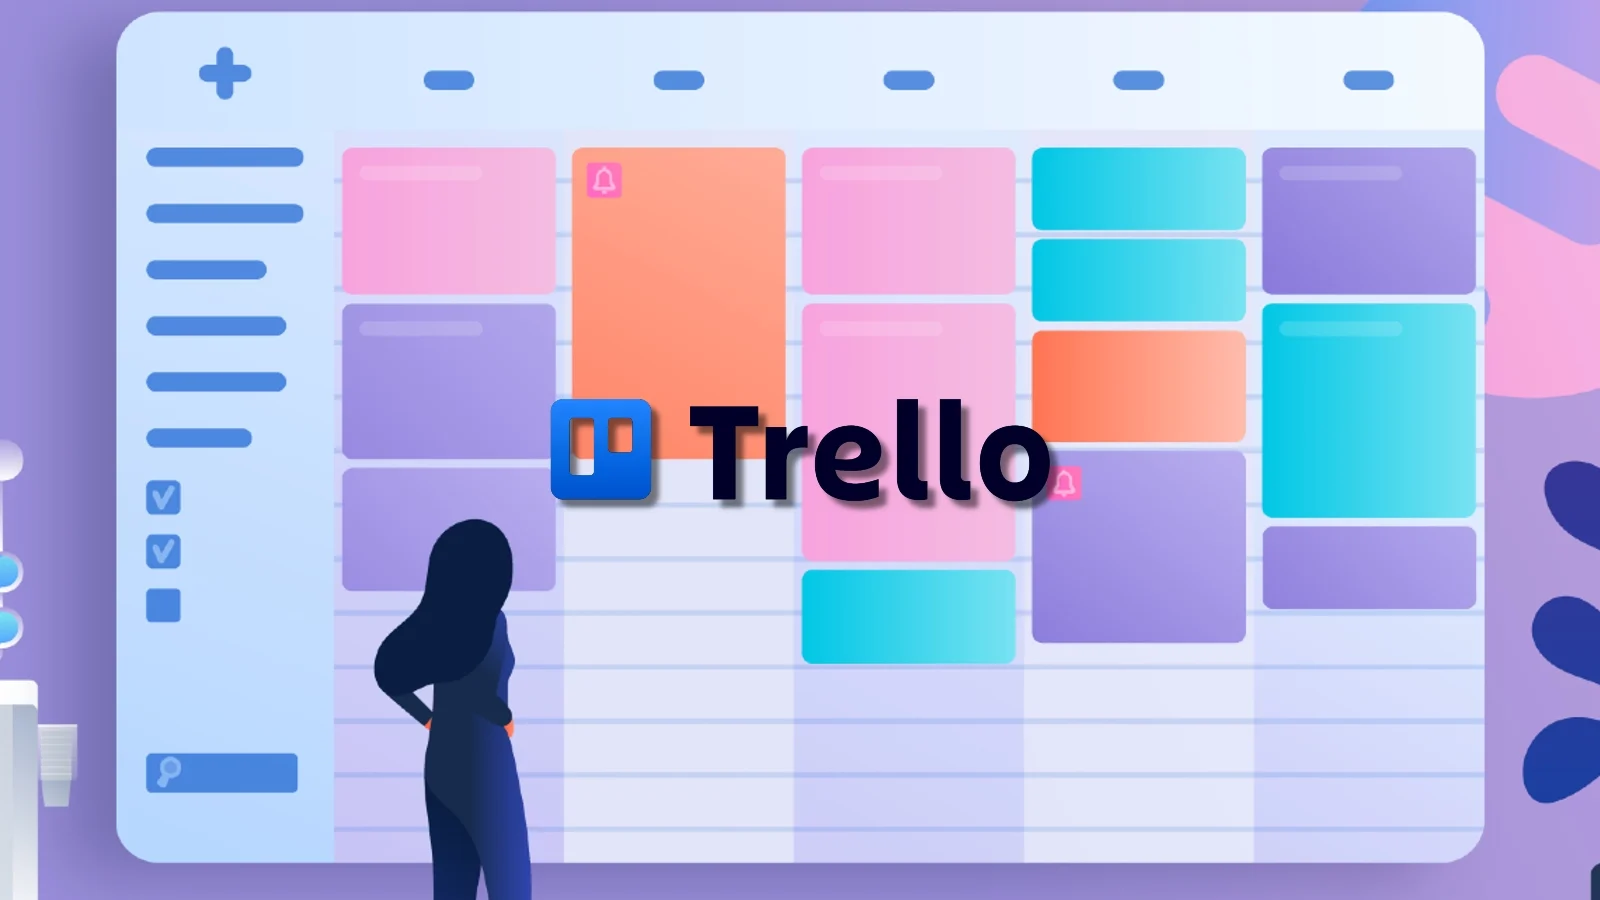 The Trello API abused to associate email addresses with 15 million user accounts